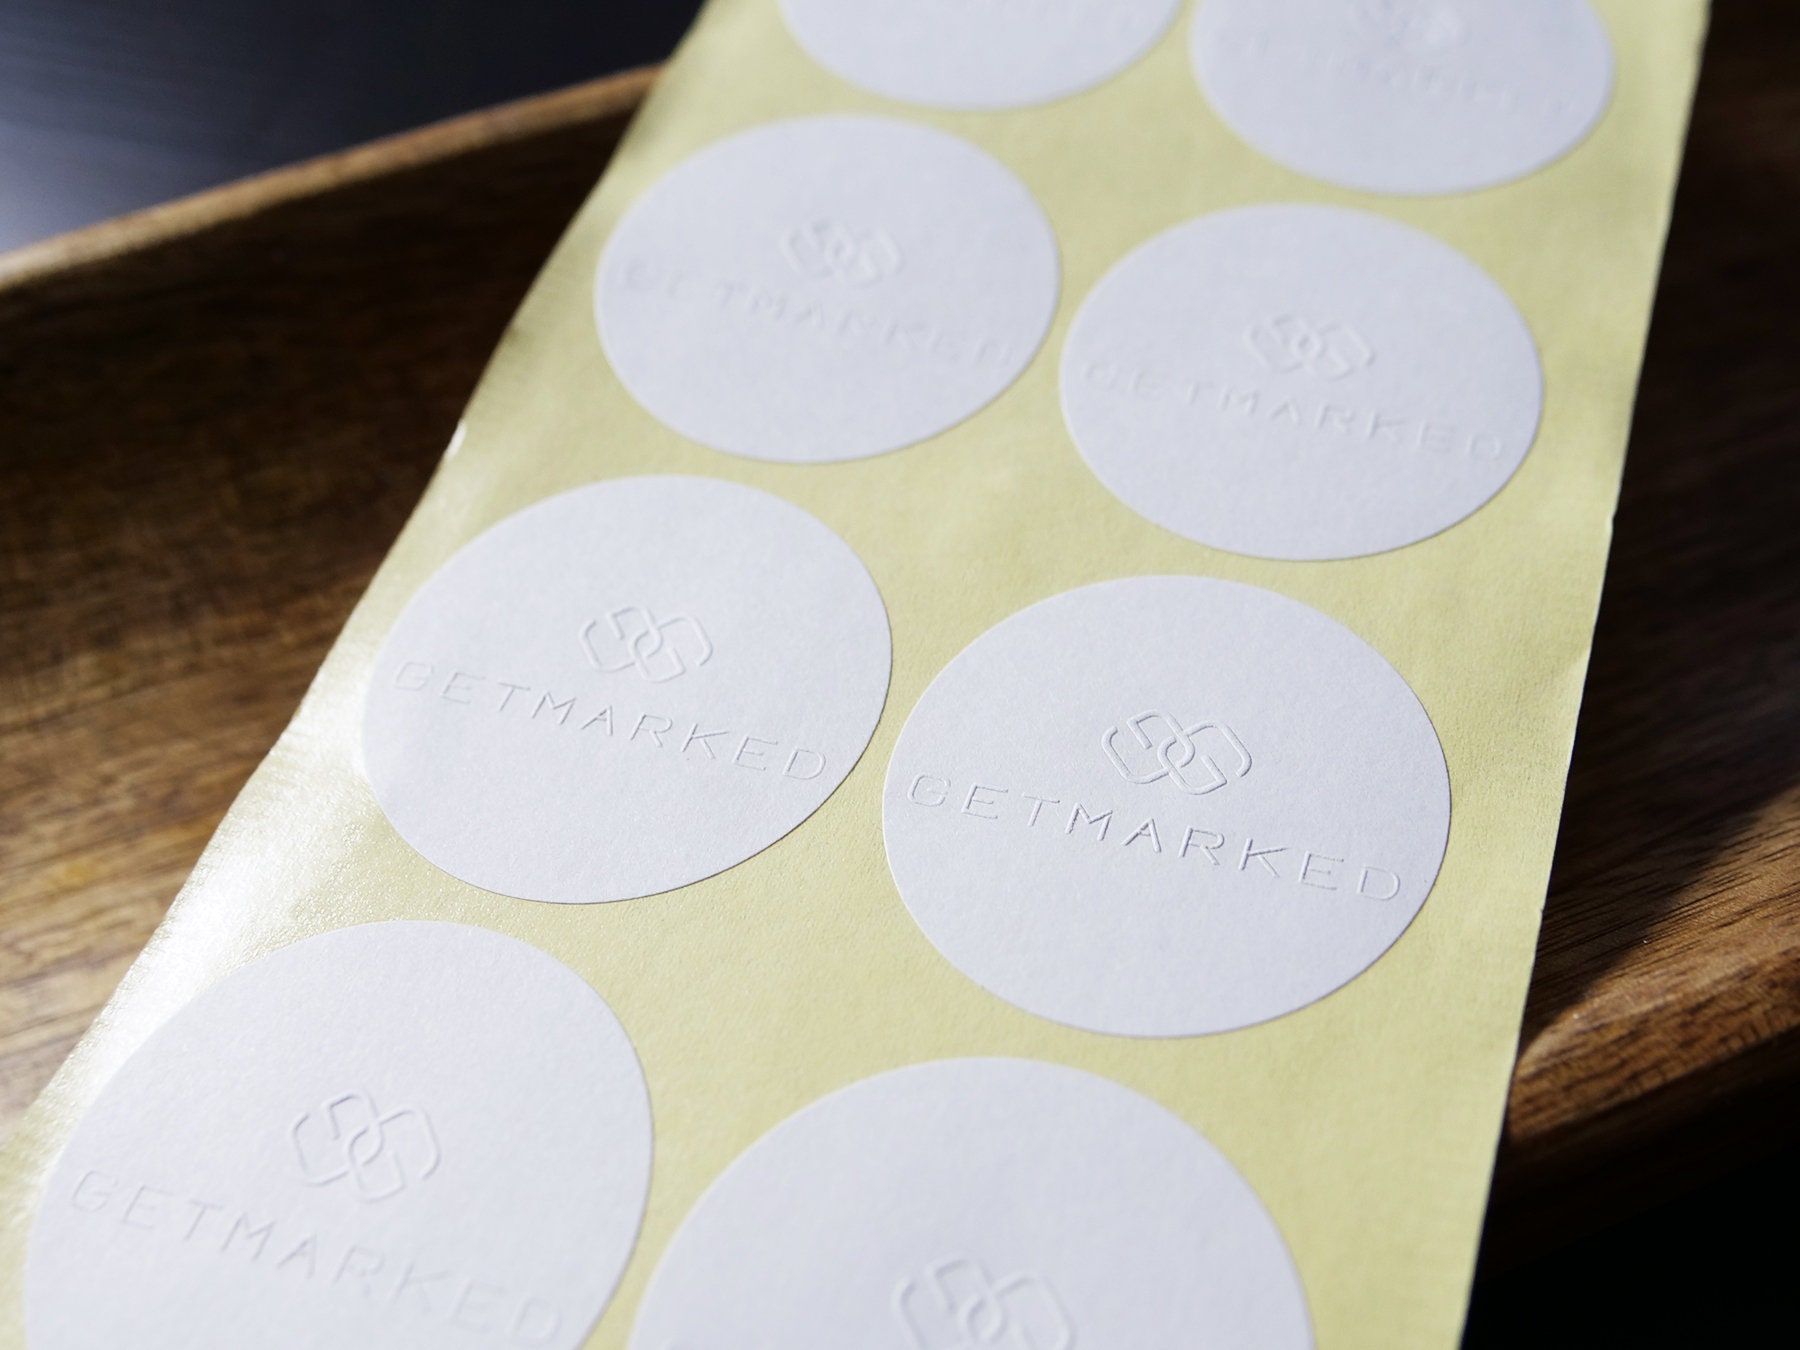 White Matte Embossed Stickers, Embossed Raised Sticker/label, Embossing  Seal Stickers, Foil/metallic Seal, Business/wedding/gift Stickers 